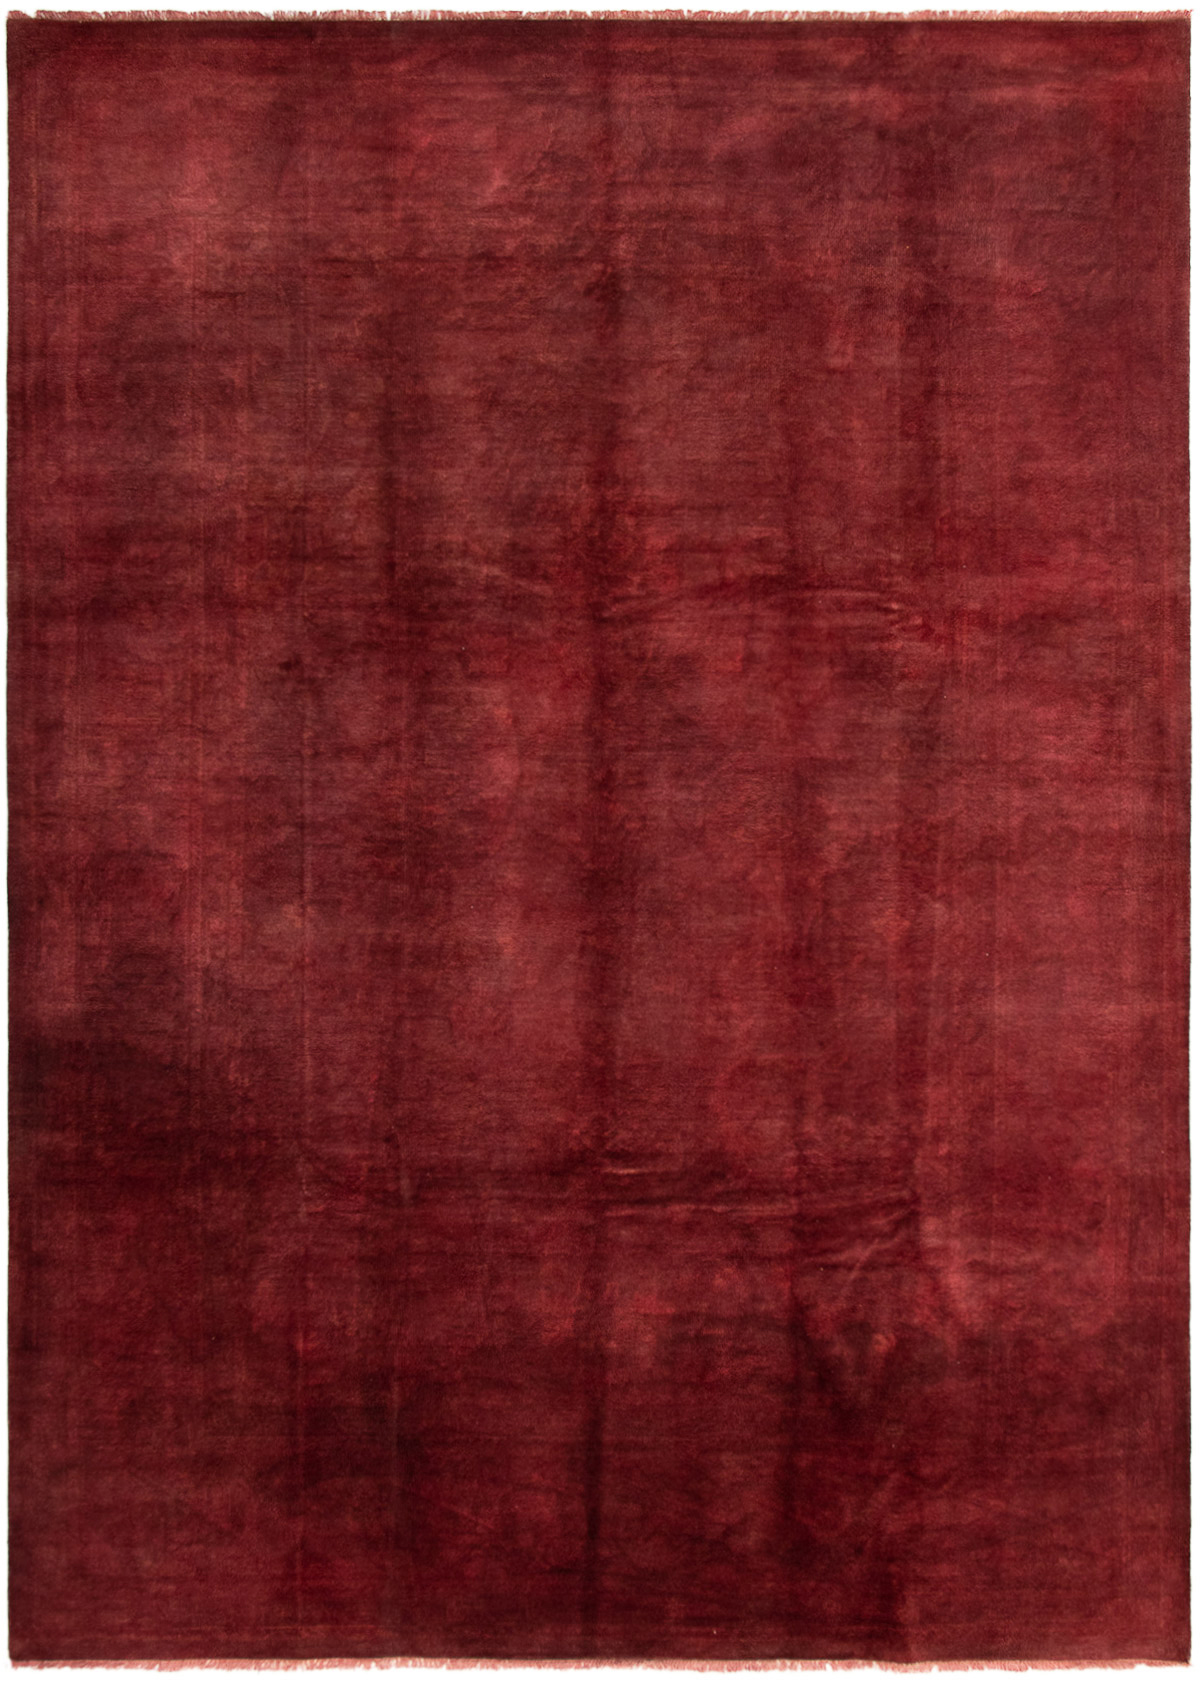 Hand-knotted Color transition Burgundy Wool Rug 9'10" x 13'9" Size: 9'10" x 13'9"  